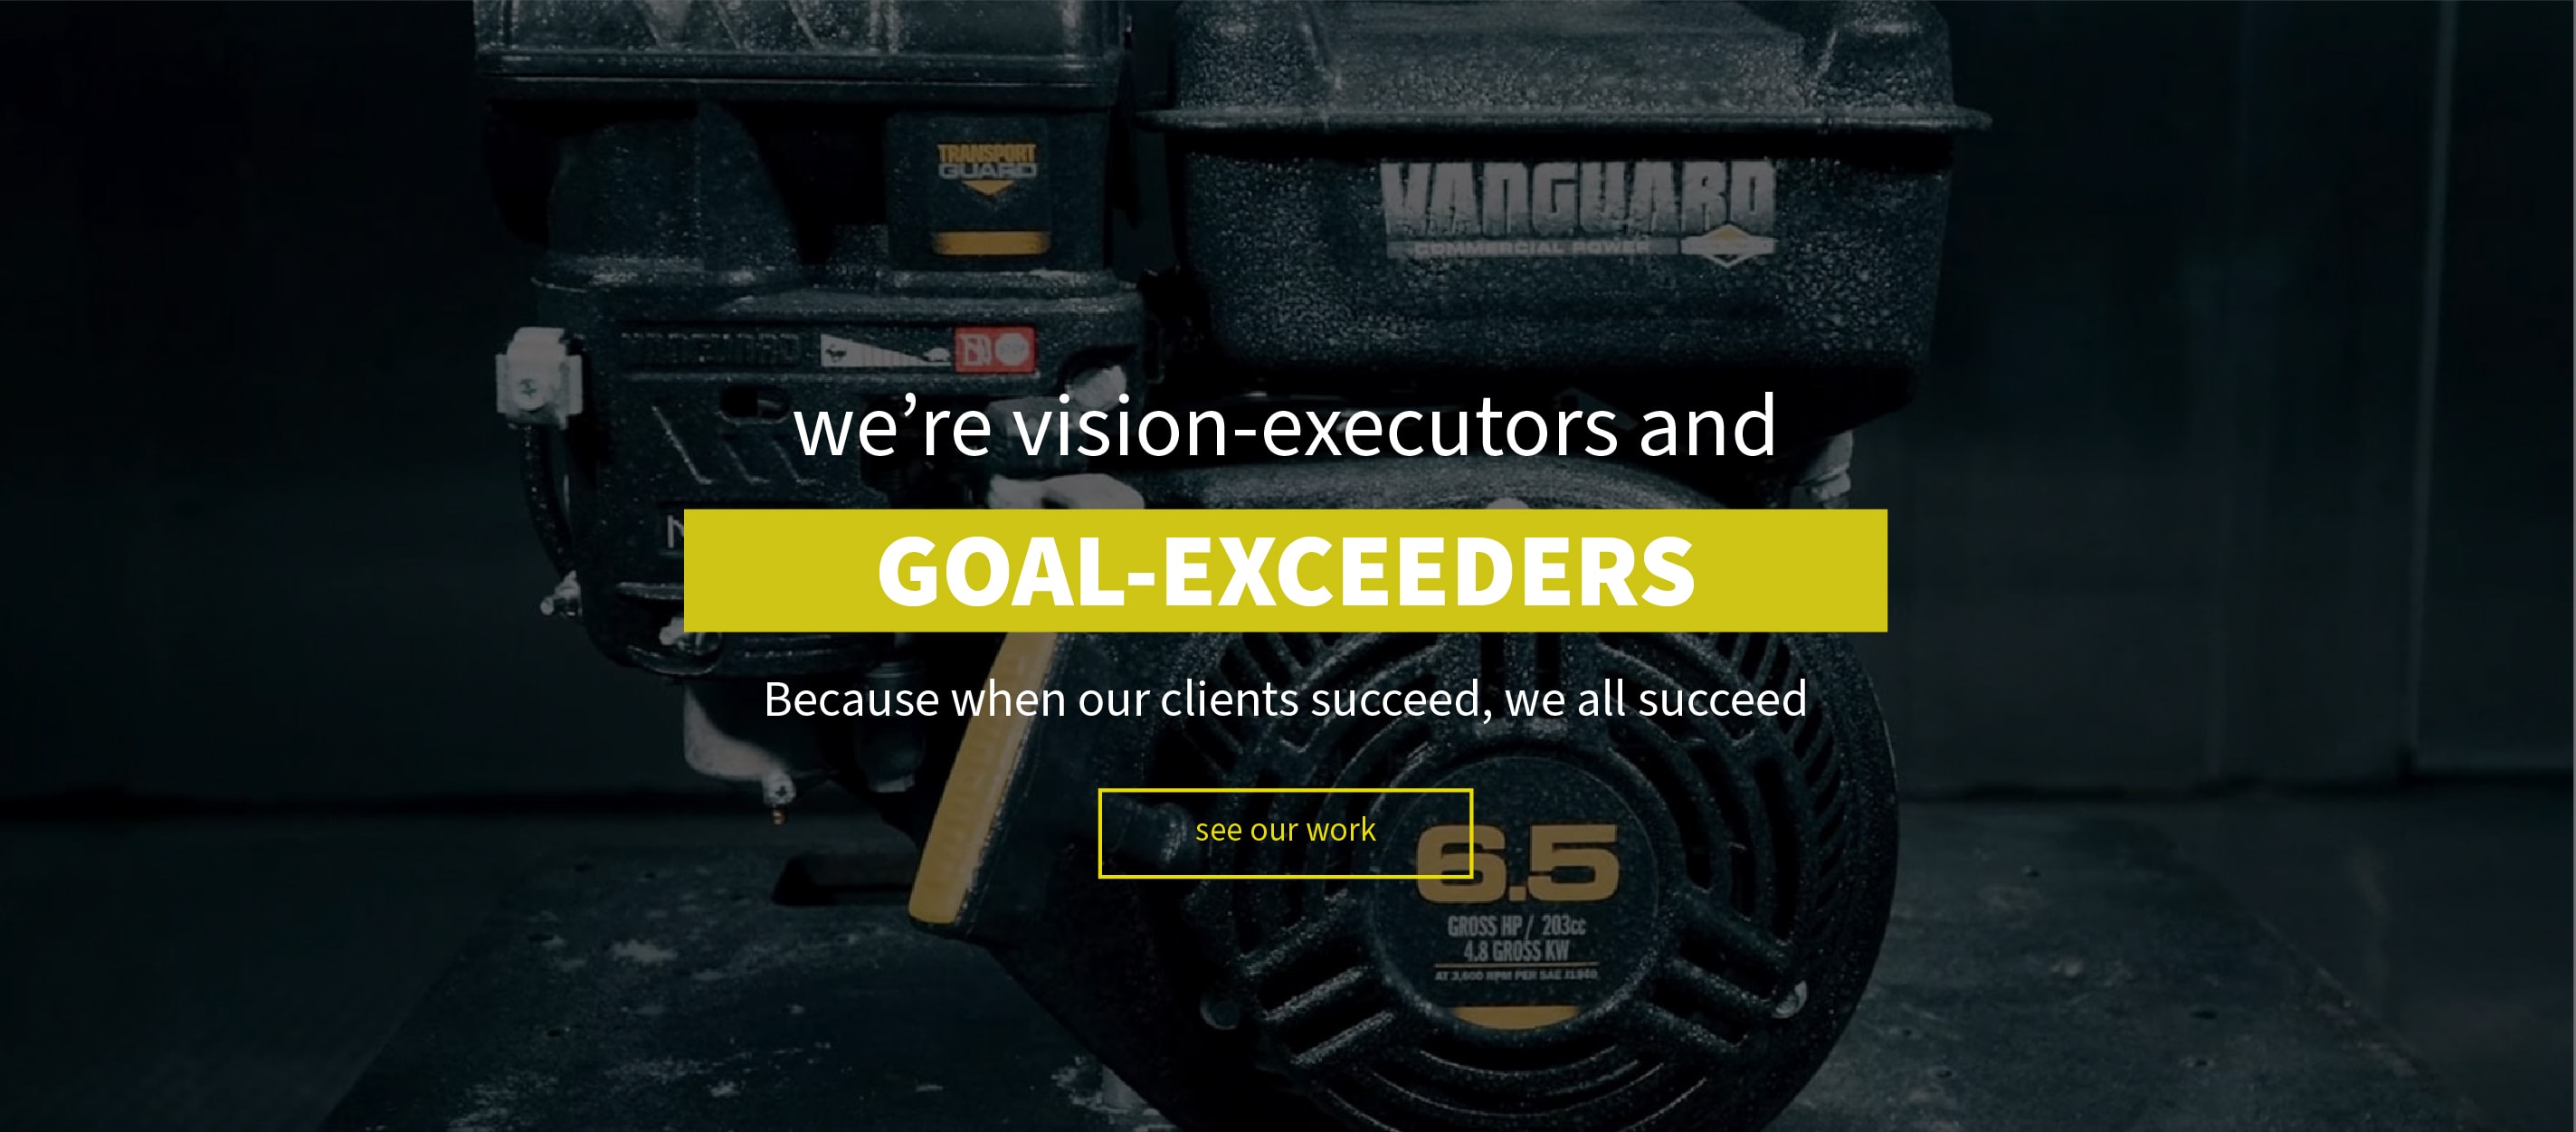 we're vision-executors and GOAL-EXCEEDERS. Because when our clients succeed, we all succeed.